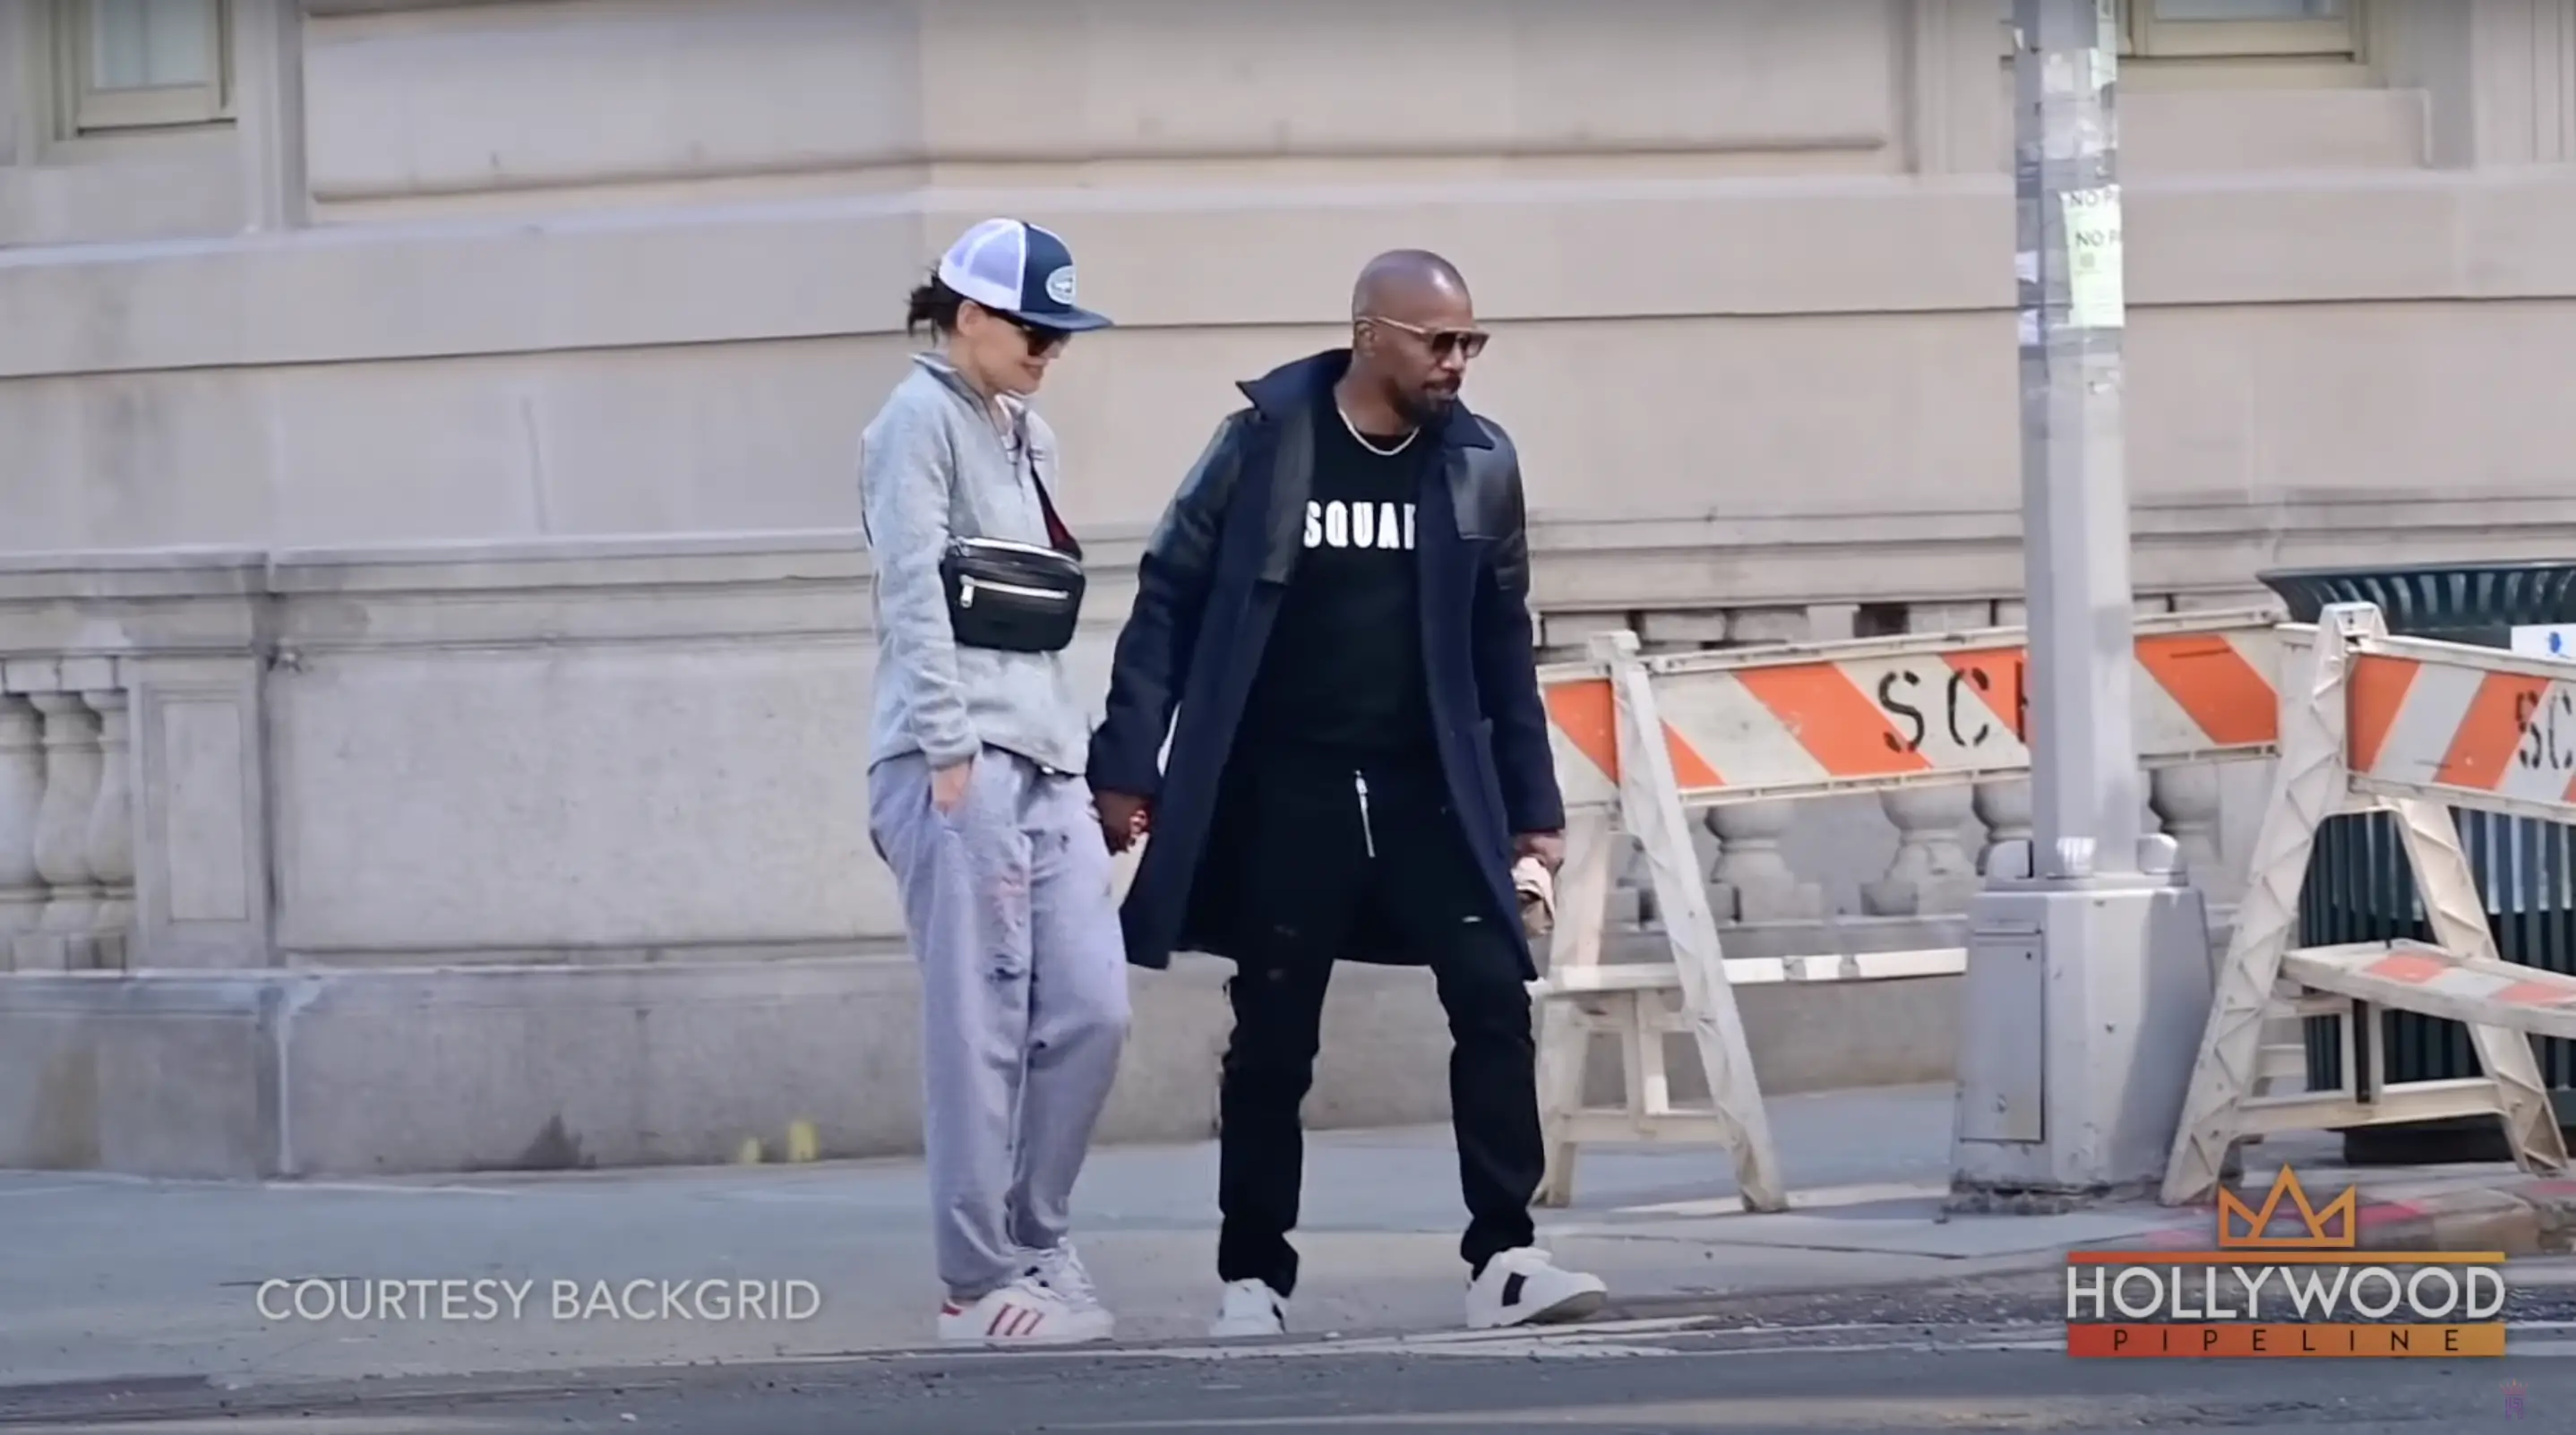 Jamie Foxx and Katie Holmes seen holding hands in a YouTube video dated April 17, 2019 | Source: youtube.com/@HollywoodPipeline